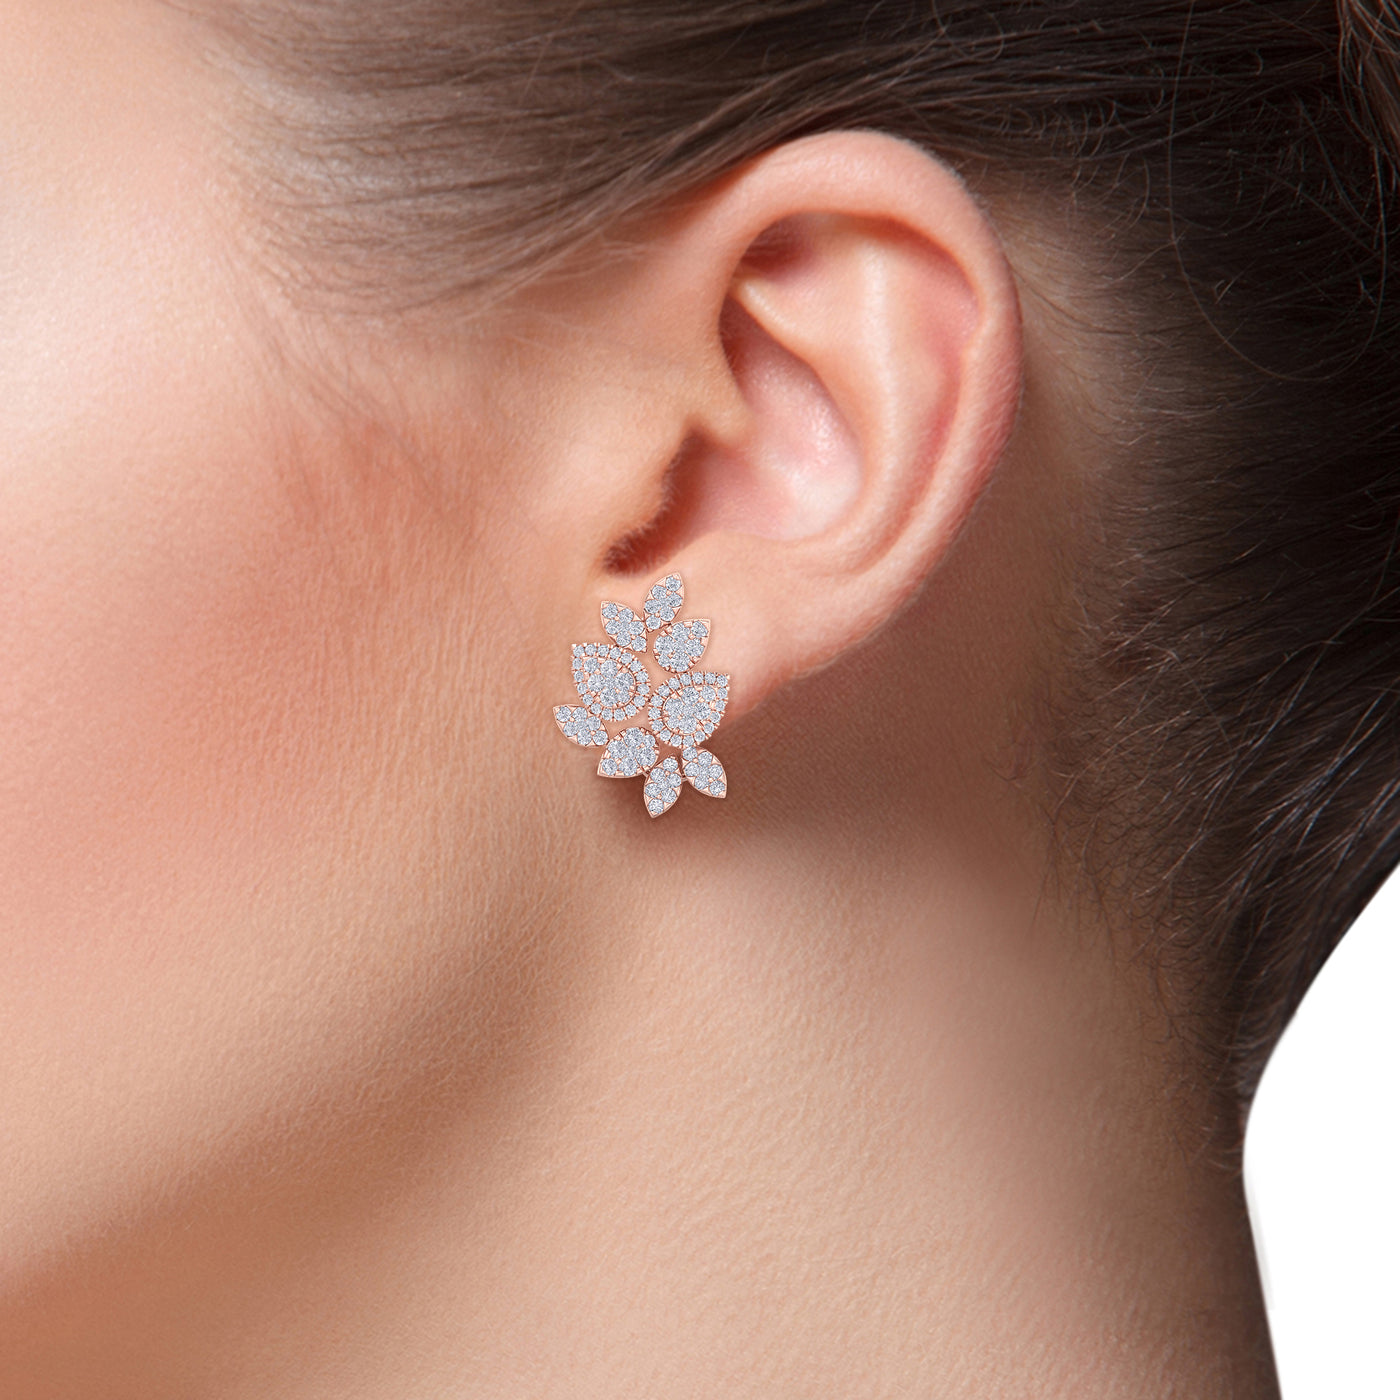 Flower shaped stud earrings in rose gold with white diamonds of 3.11 ct in weight